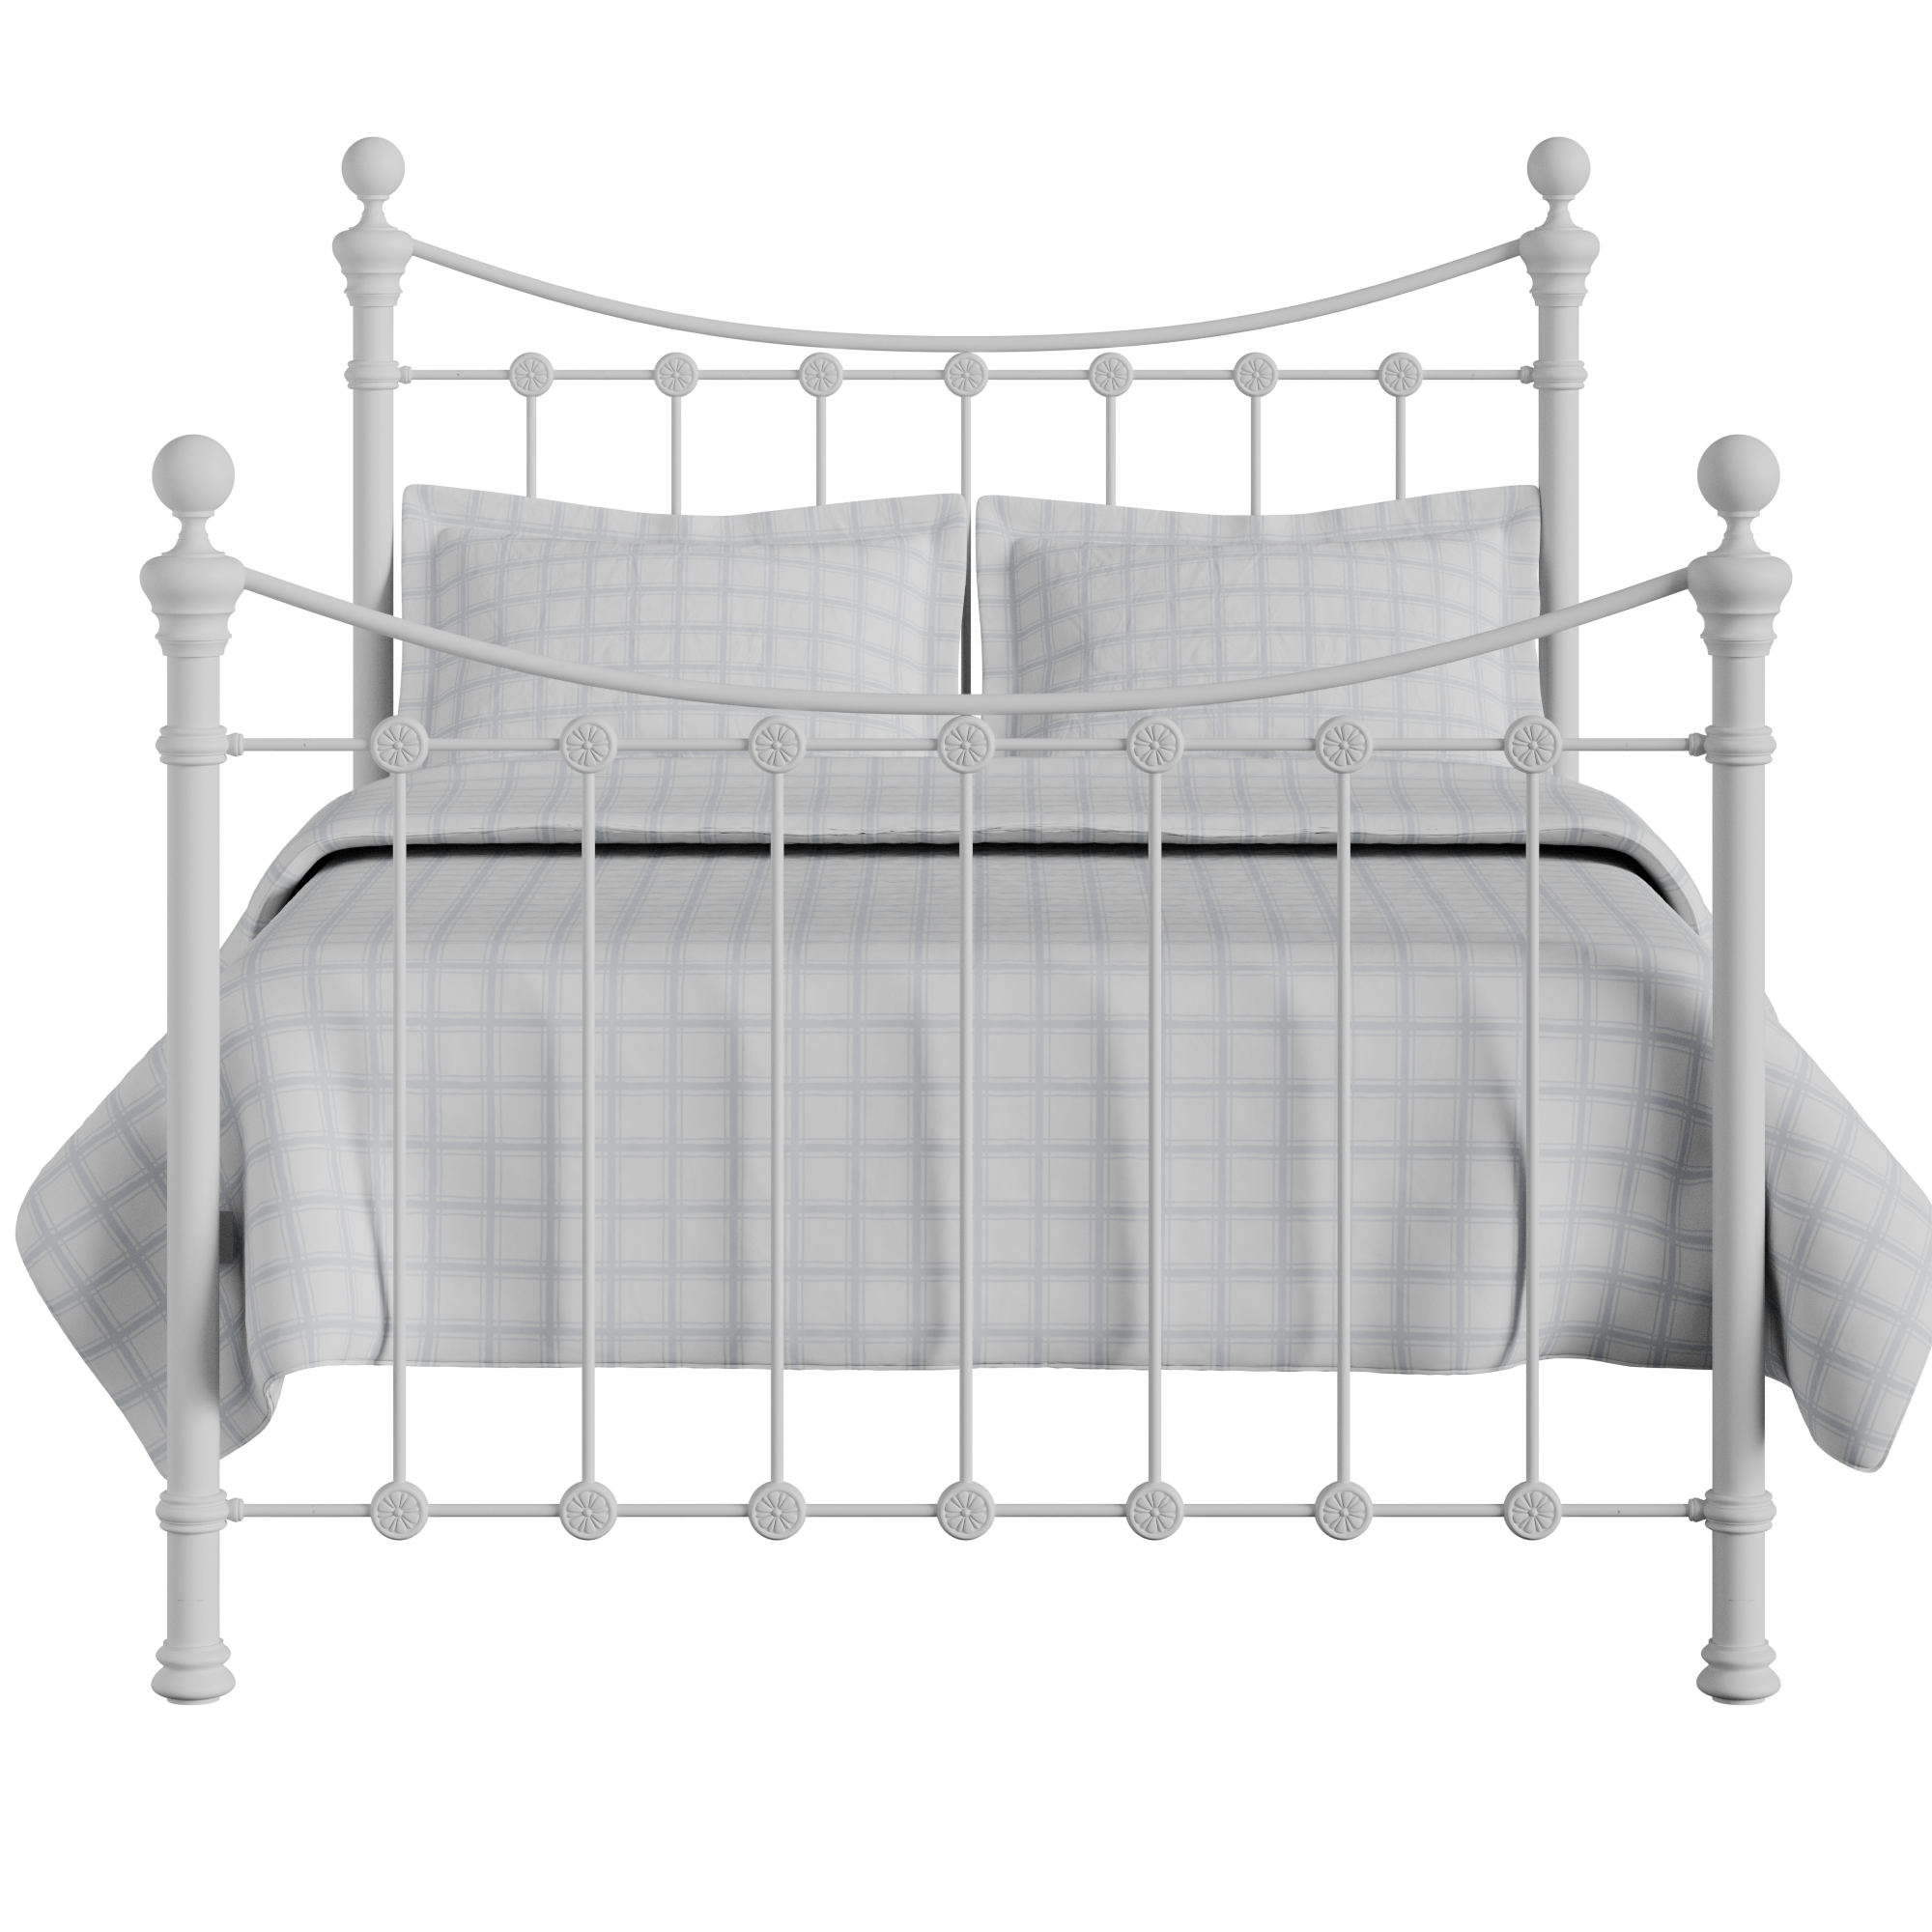 Selkirk Solo iron/metal bed in white